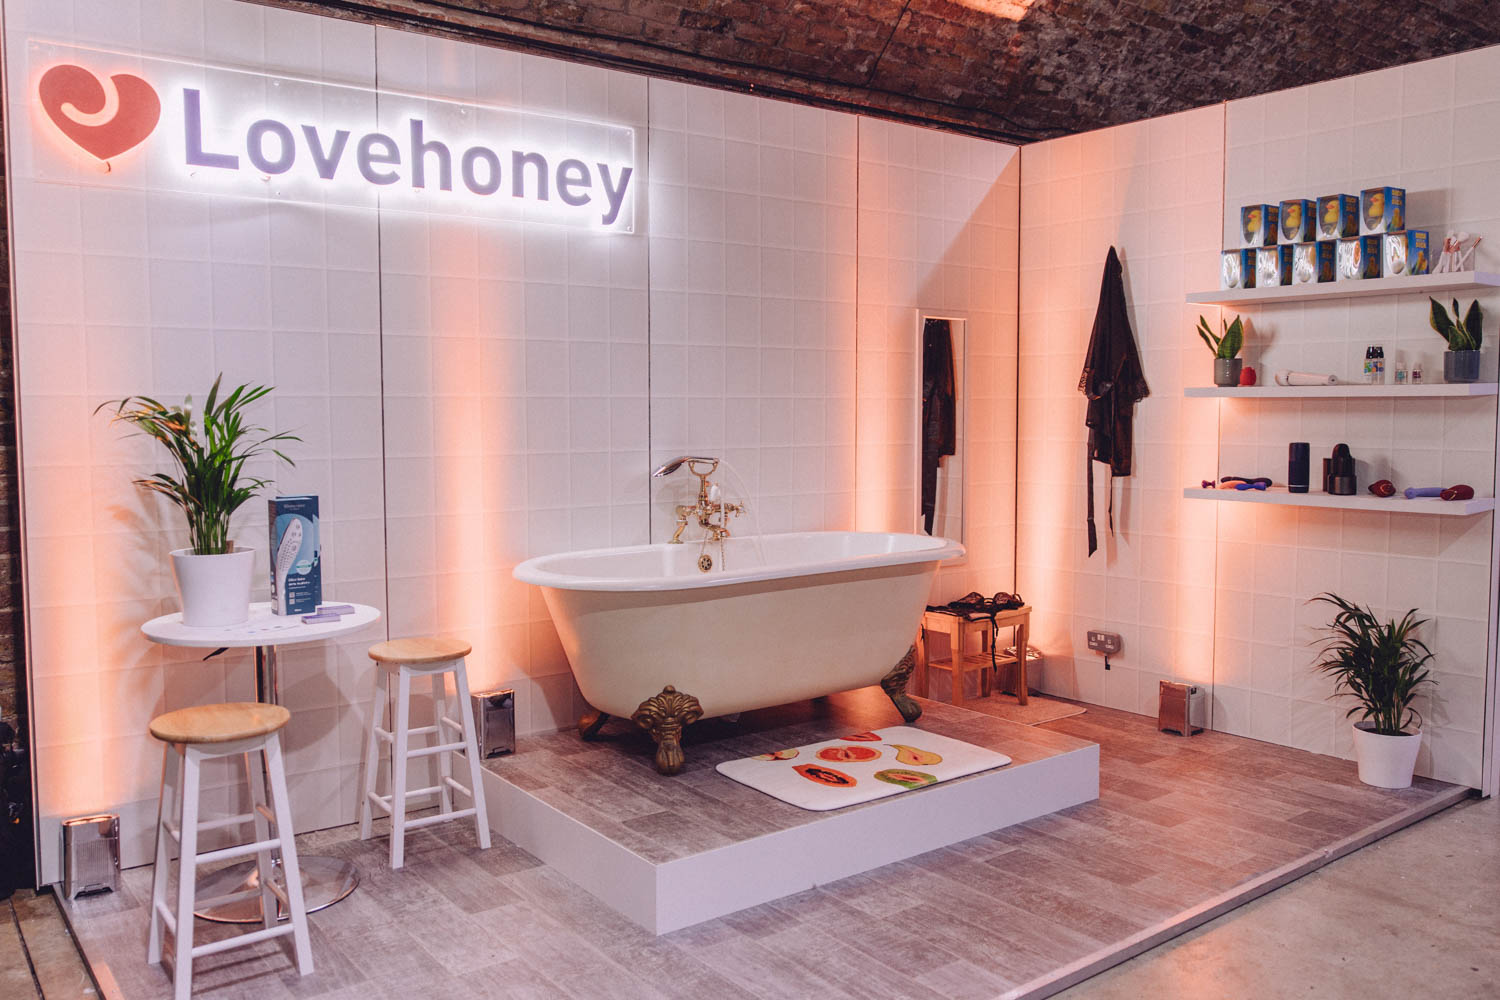 Lovehoney premium showcase stand with bath tub at the bCreator Health & Wellbeing Show